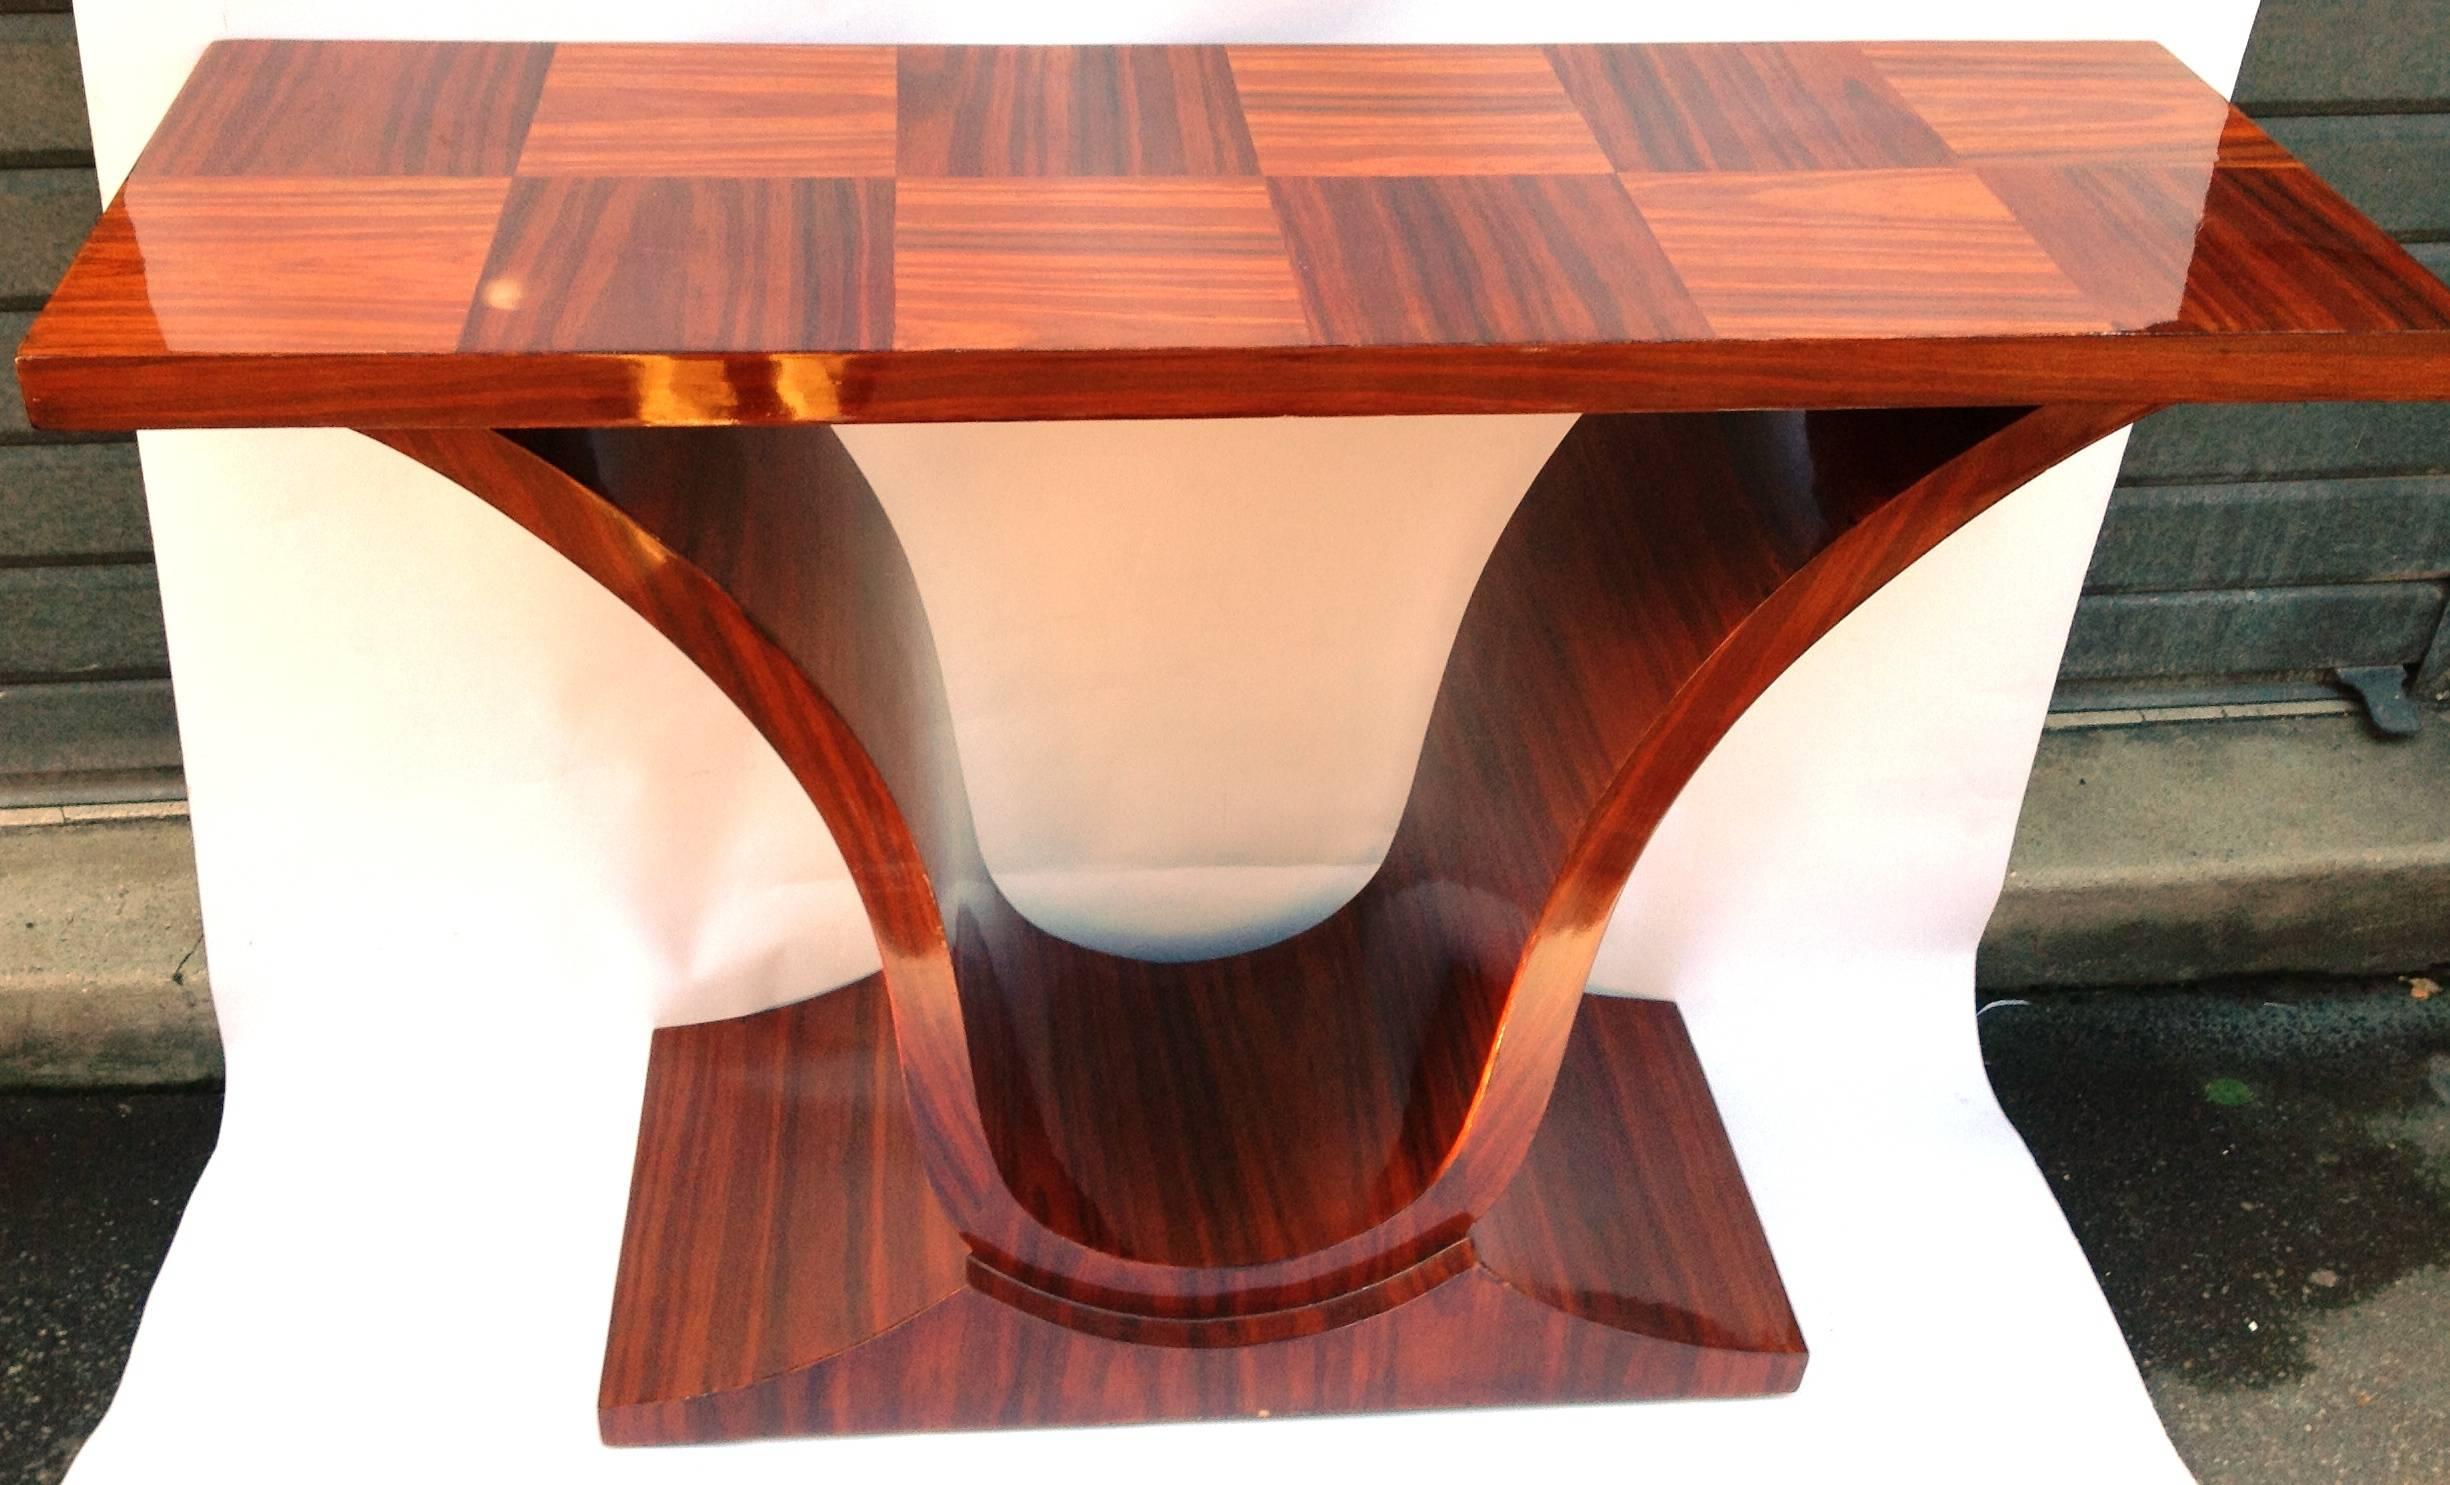 Elegant Art Deco style mahogany veneer console table, late 20th century
with chessboard parquetry on top,
late 20th century.
some scratches and losses